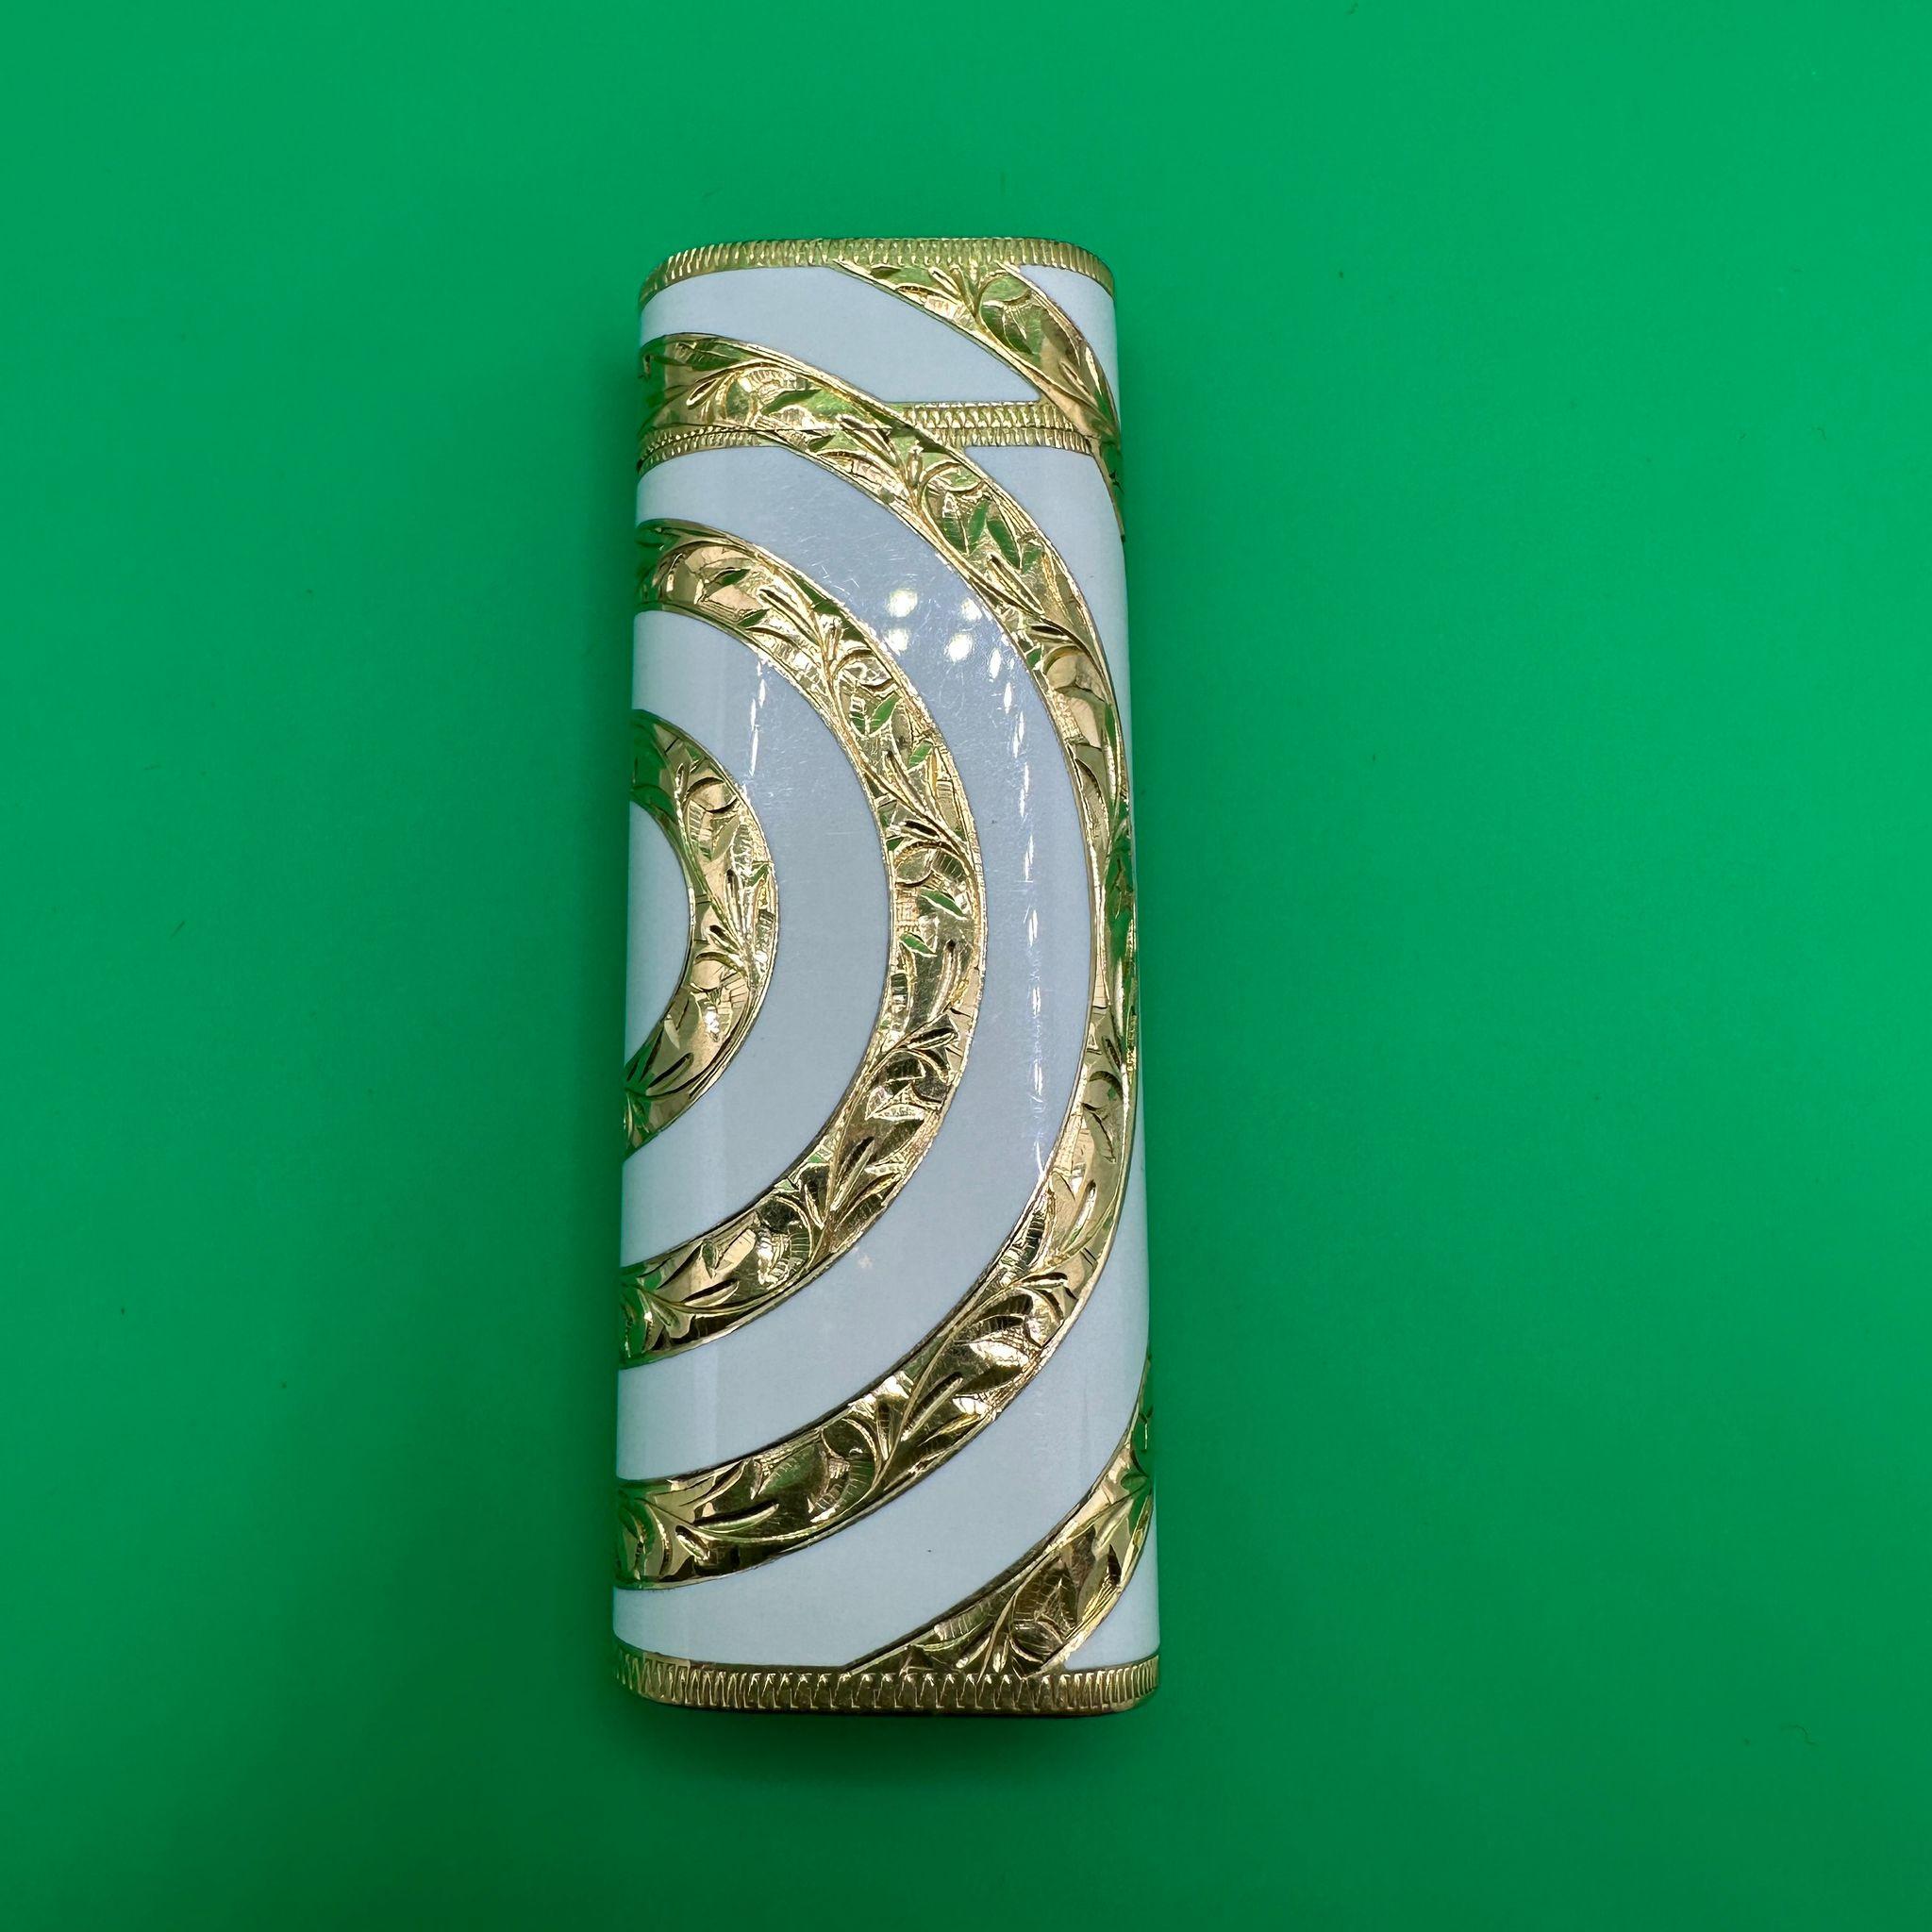 Rare Vintage Cartier RoyKing 18K Gold inlay and White Enamel 
Circa 70s
White Enamel
18 Gold inlay 
Baroque design 

Cartier “Royking” lighter.
Circe 1970
CARTIER  Roy King Rollagas, a Unique RARE example of a ROYKING designed Cartier Rollagas